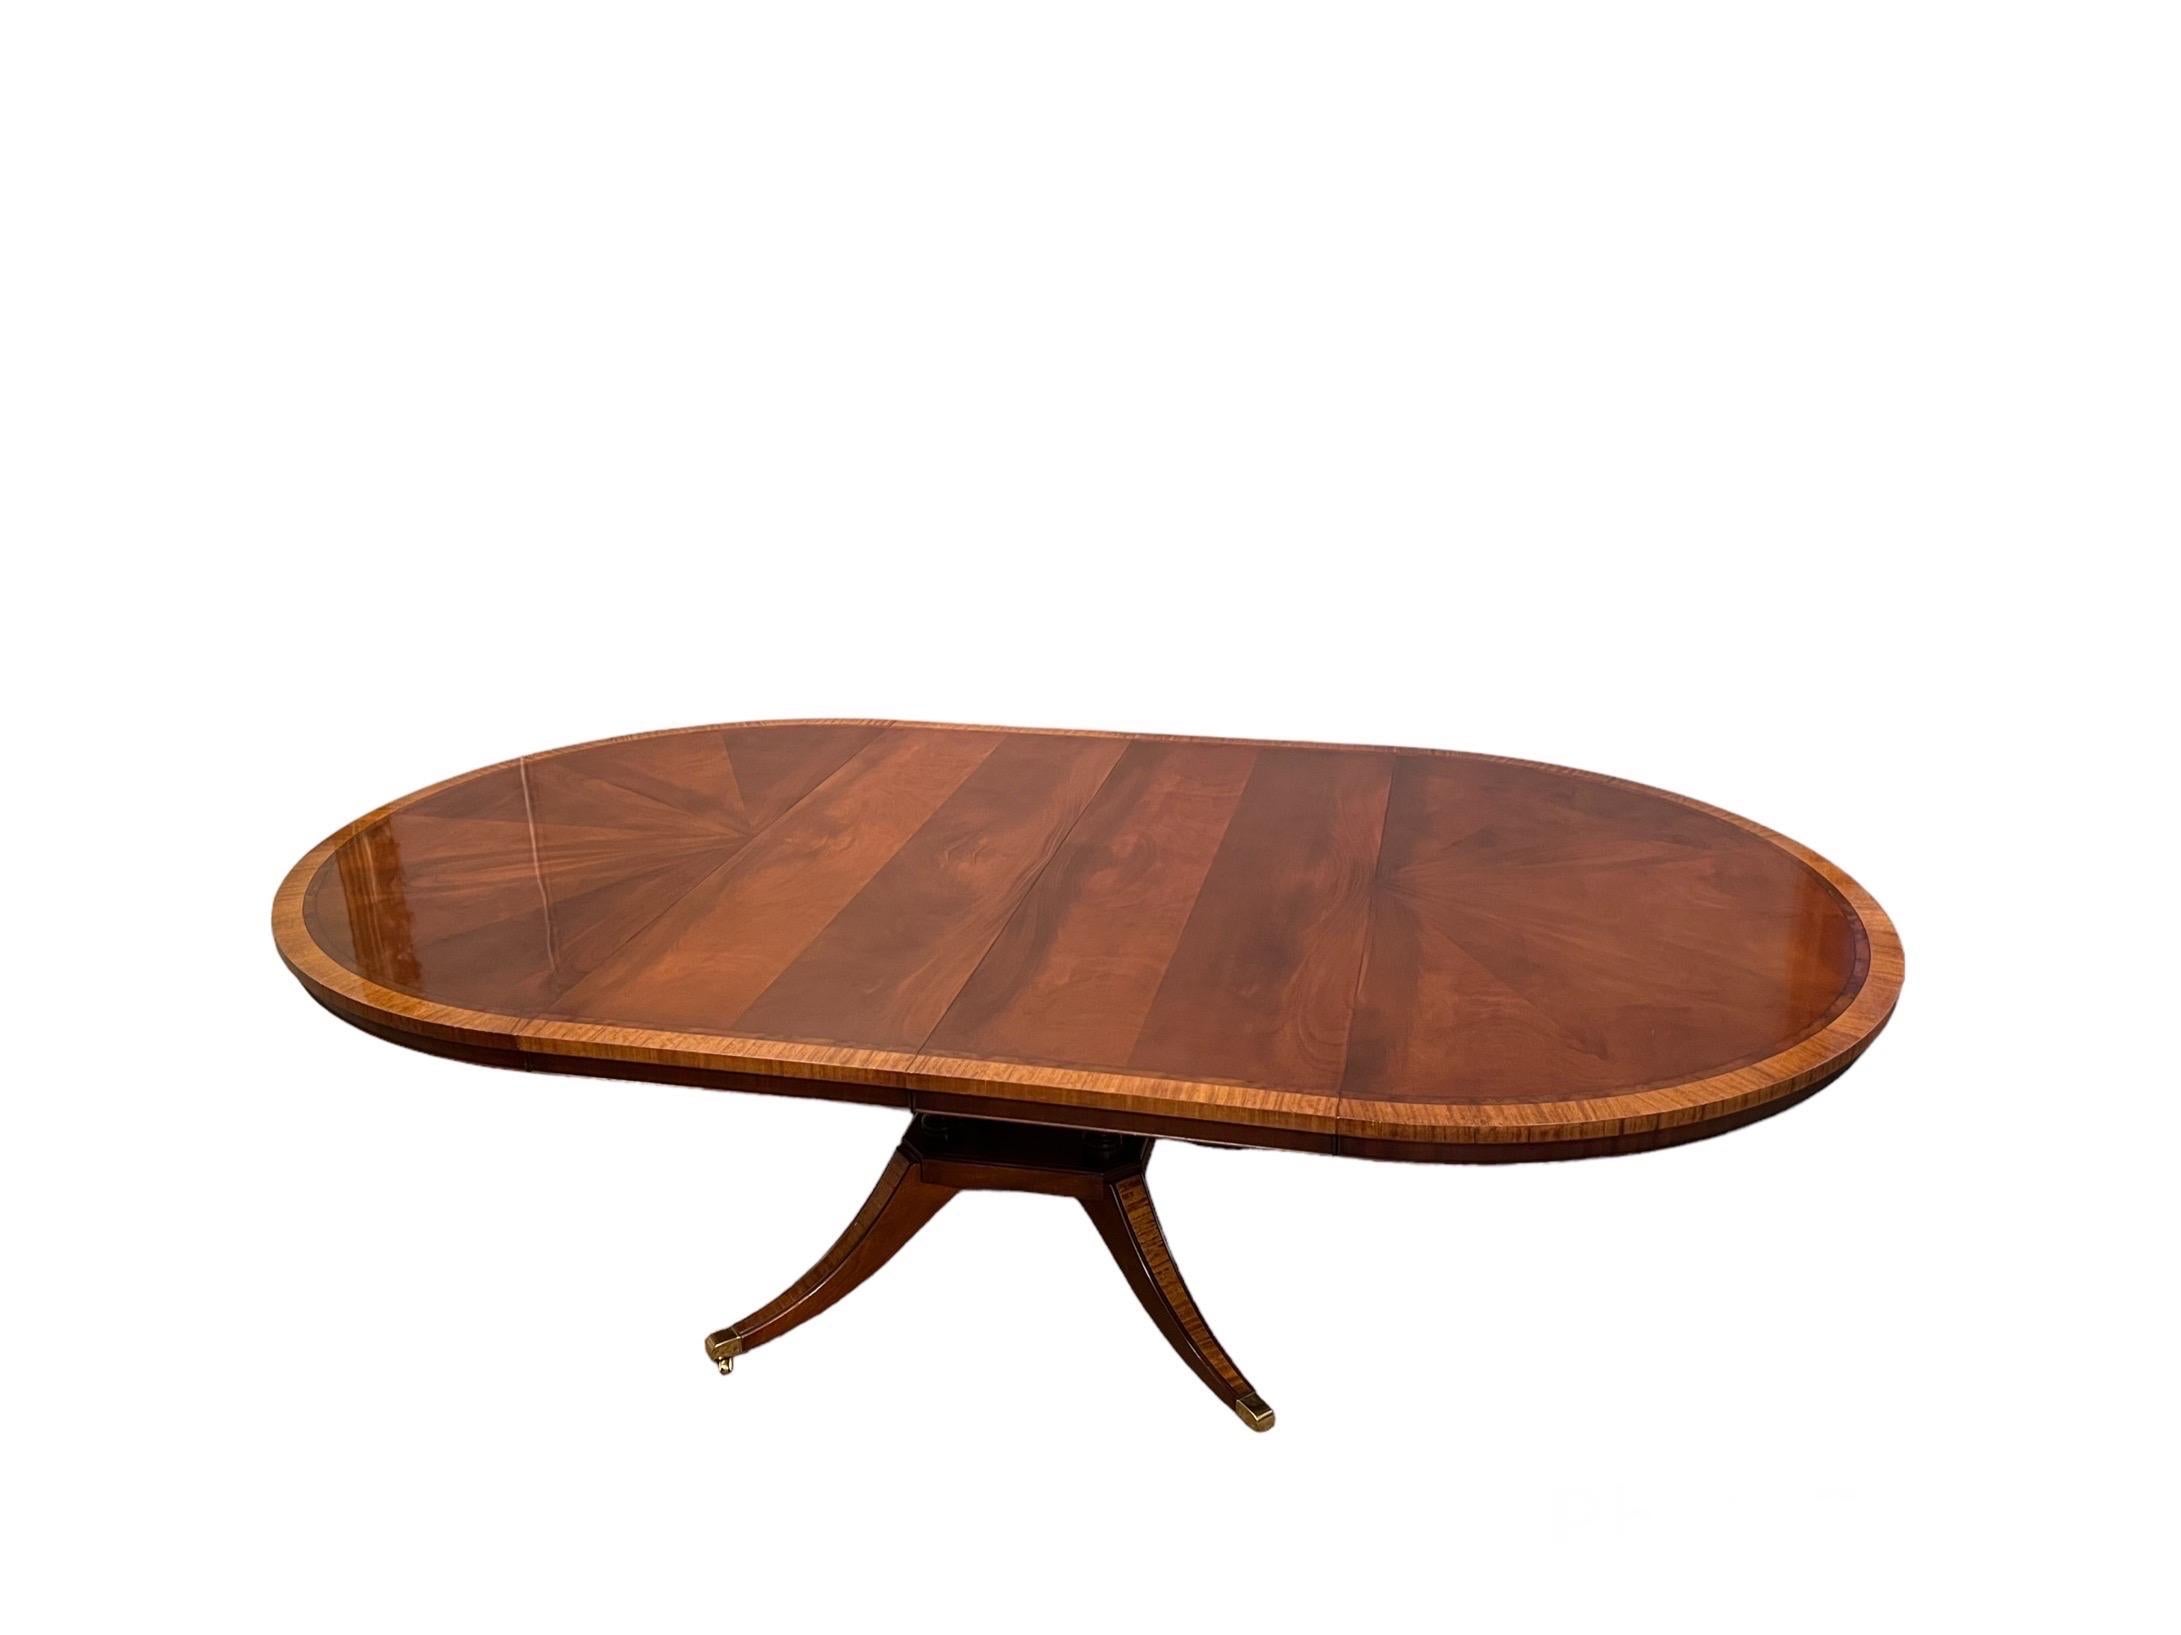 Mahogany & Cross-banded single pedestal extension, dining table with two leaves. This high quality quadruped, single pedestal, dining table. It is the perfect compromise between a circular dining table when closed to an oblong table with two leaves,